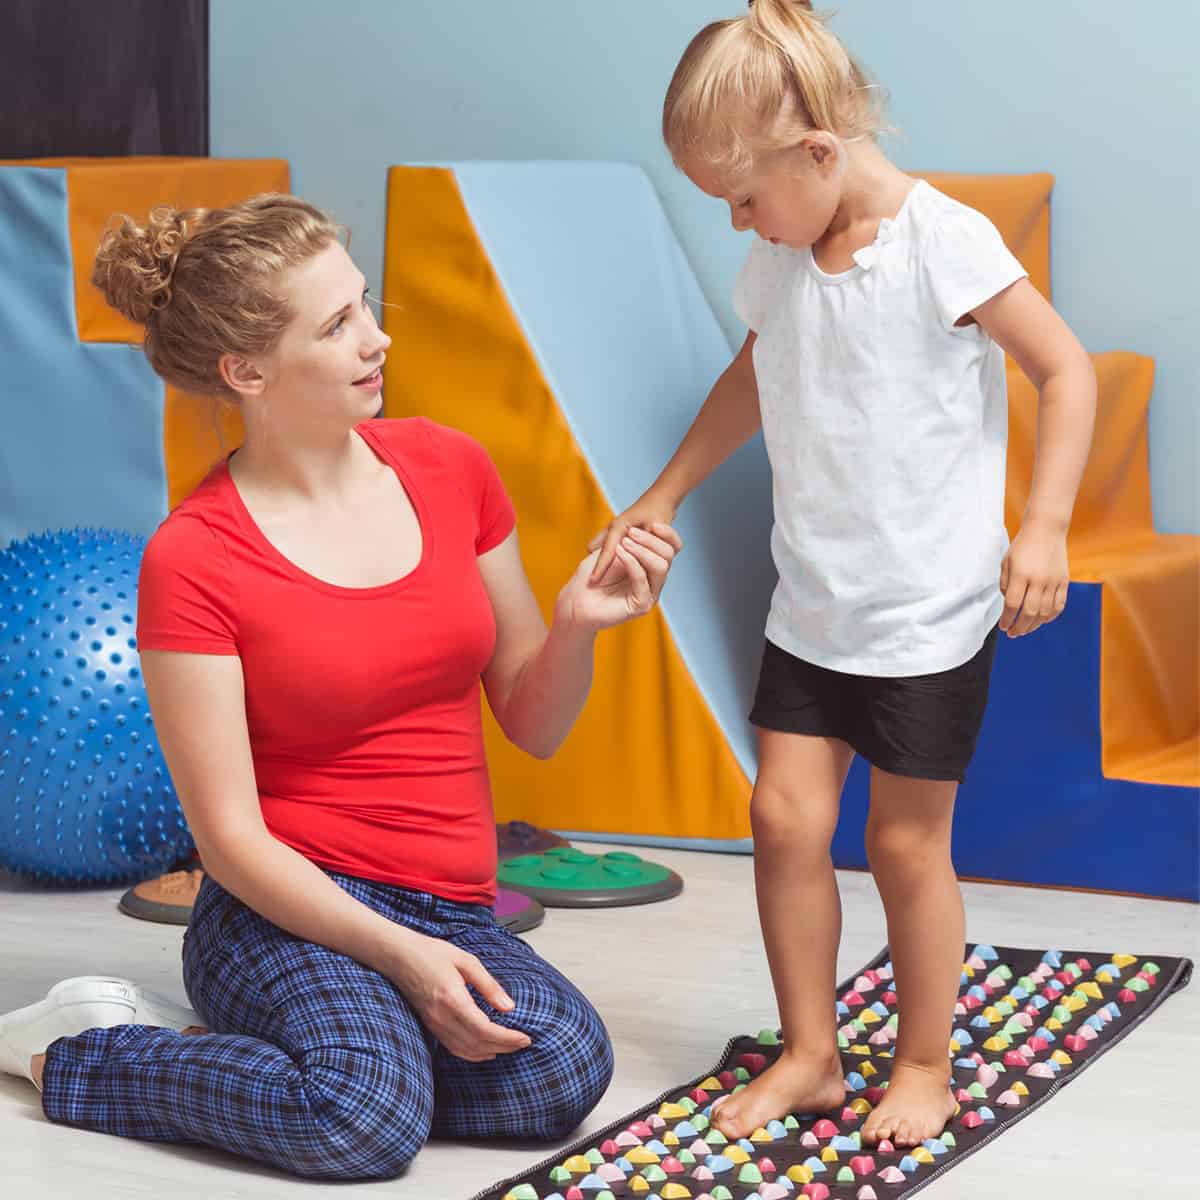 Occupational therapy for Autism: How Does it Help?